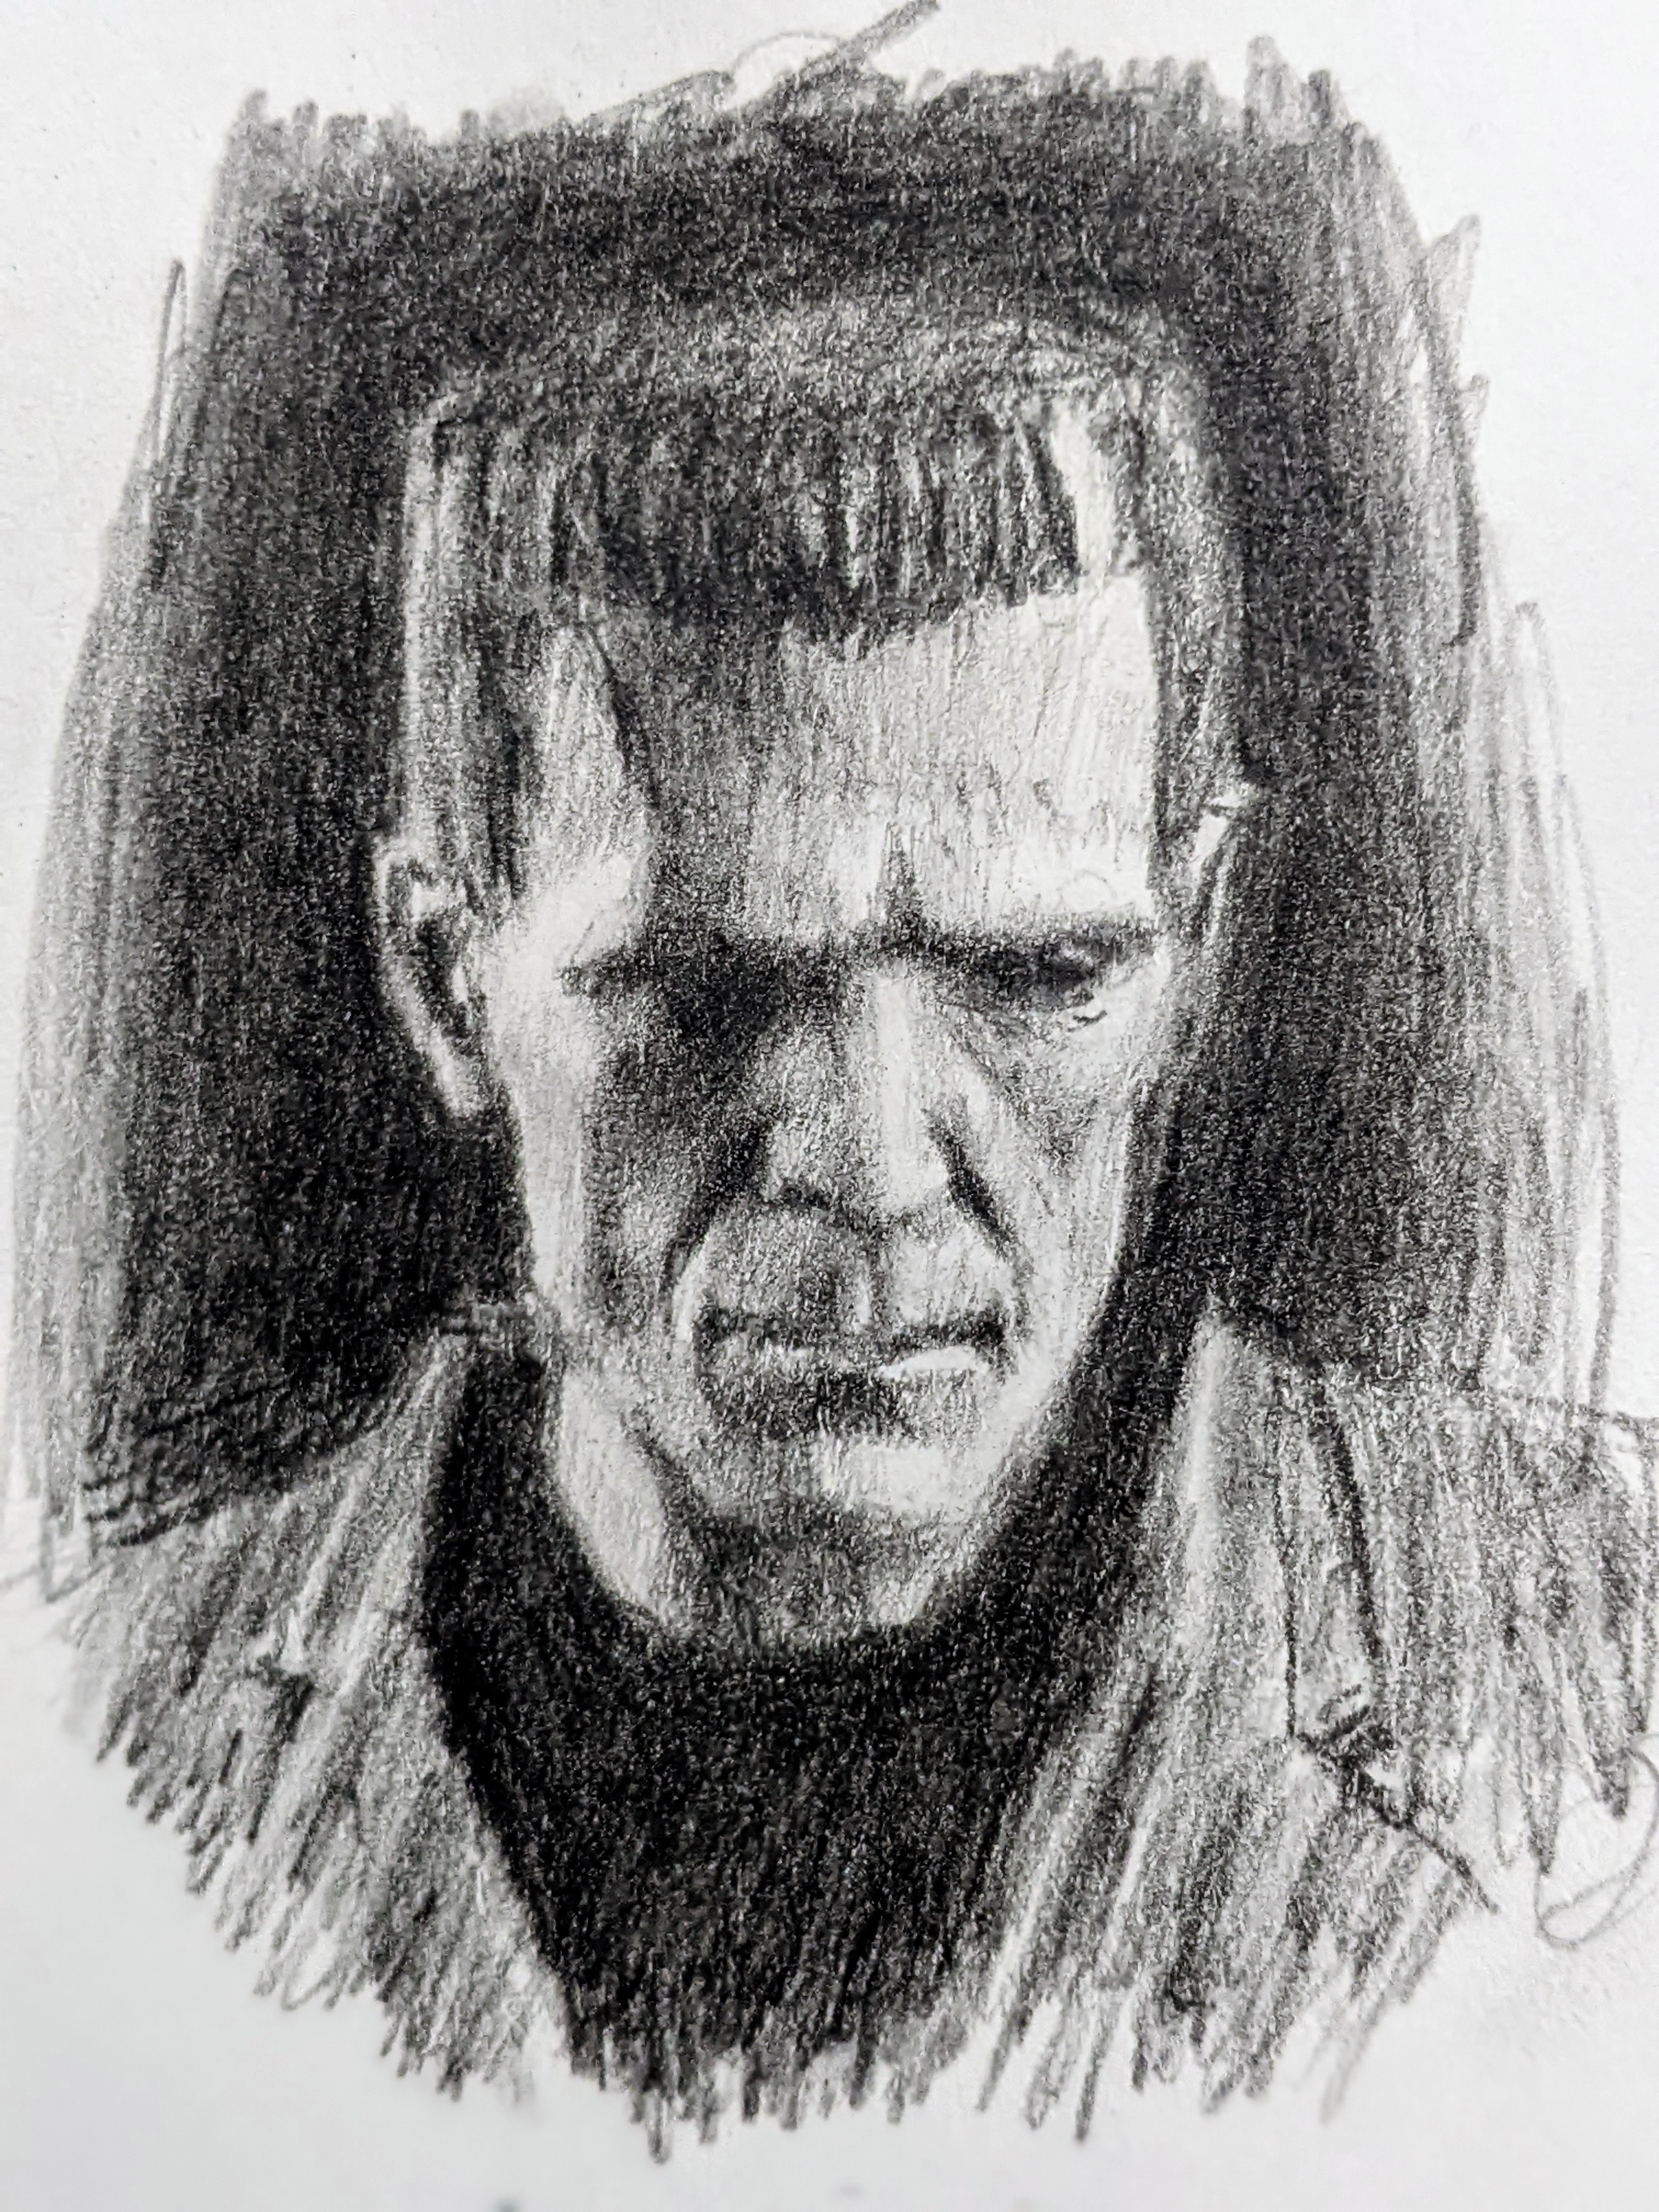 Sketch of Frankenstein's Monster. Pencil on paper from photo reference I took